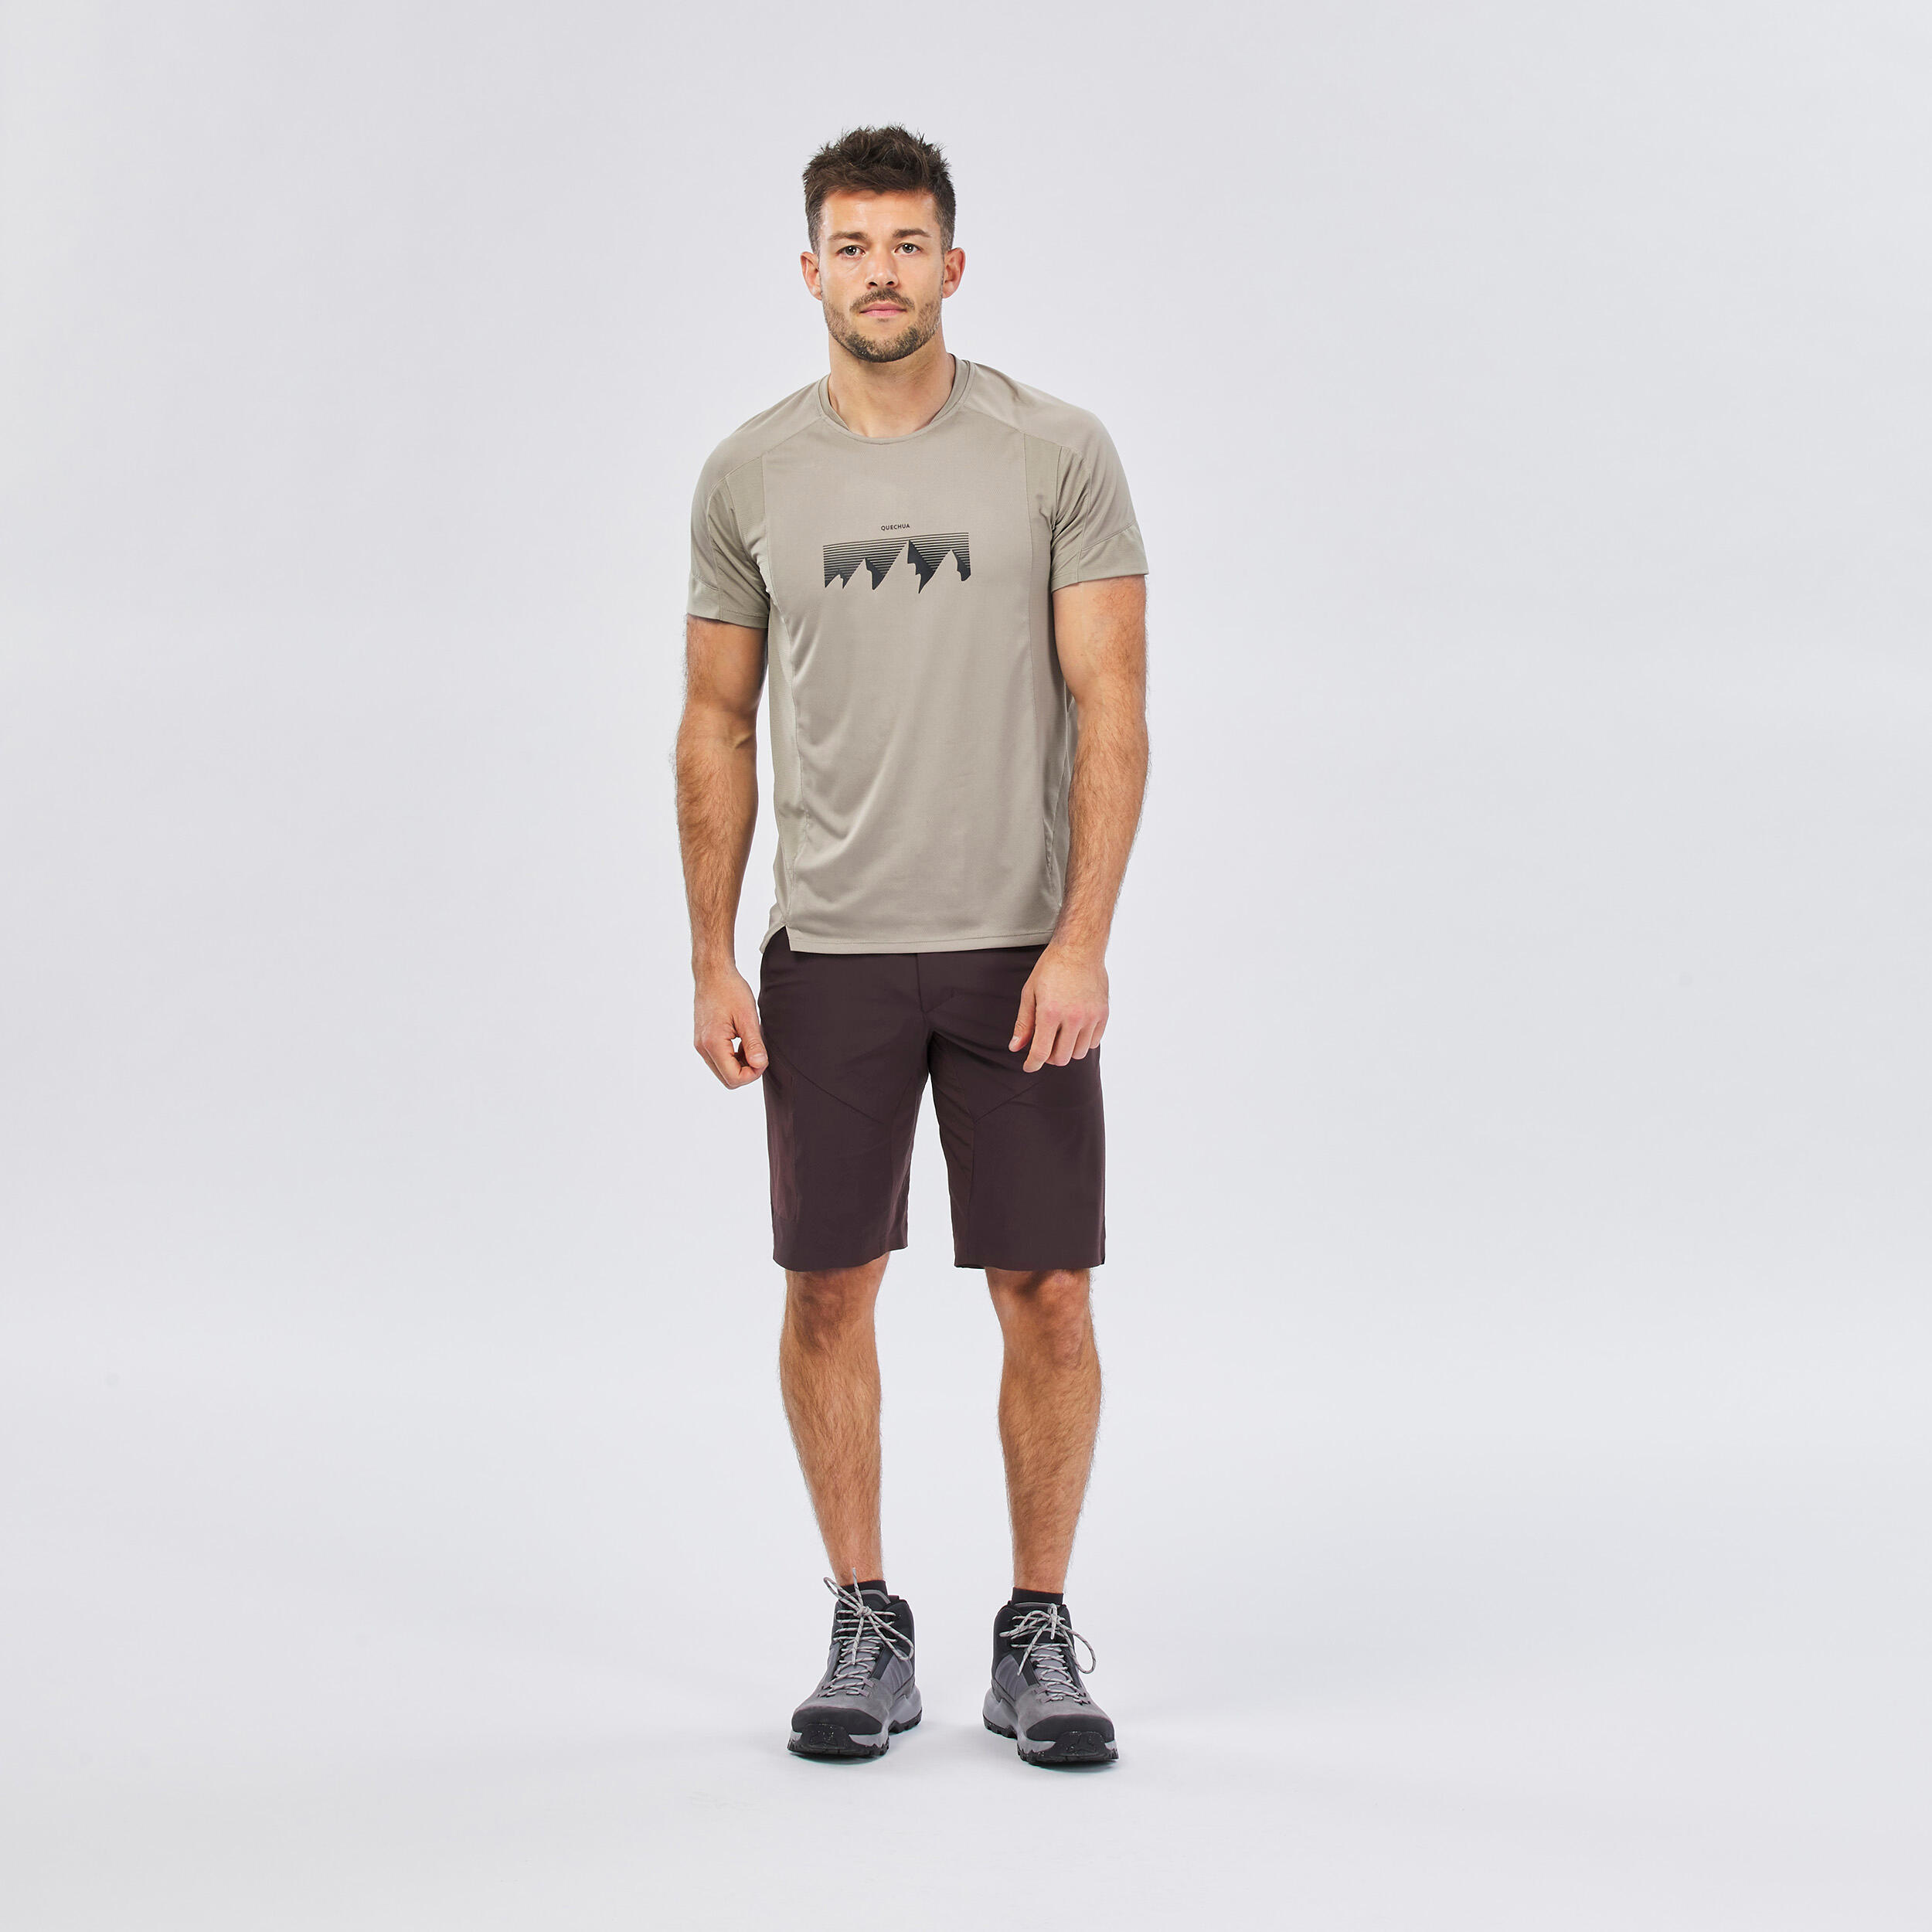 Men's Hiking Synthetic Short-Sleeved T-Shirt  MH500 2/4